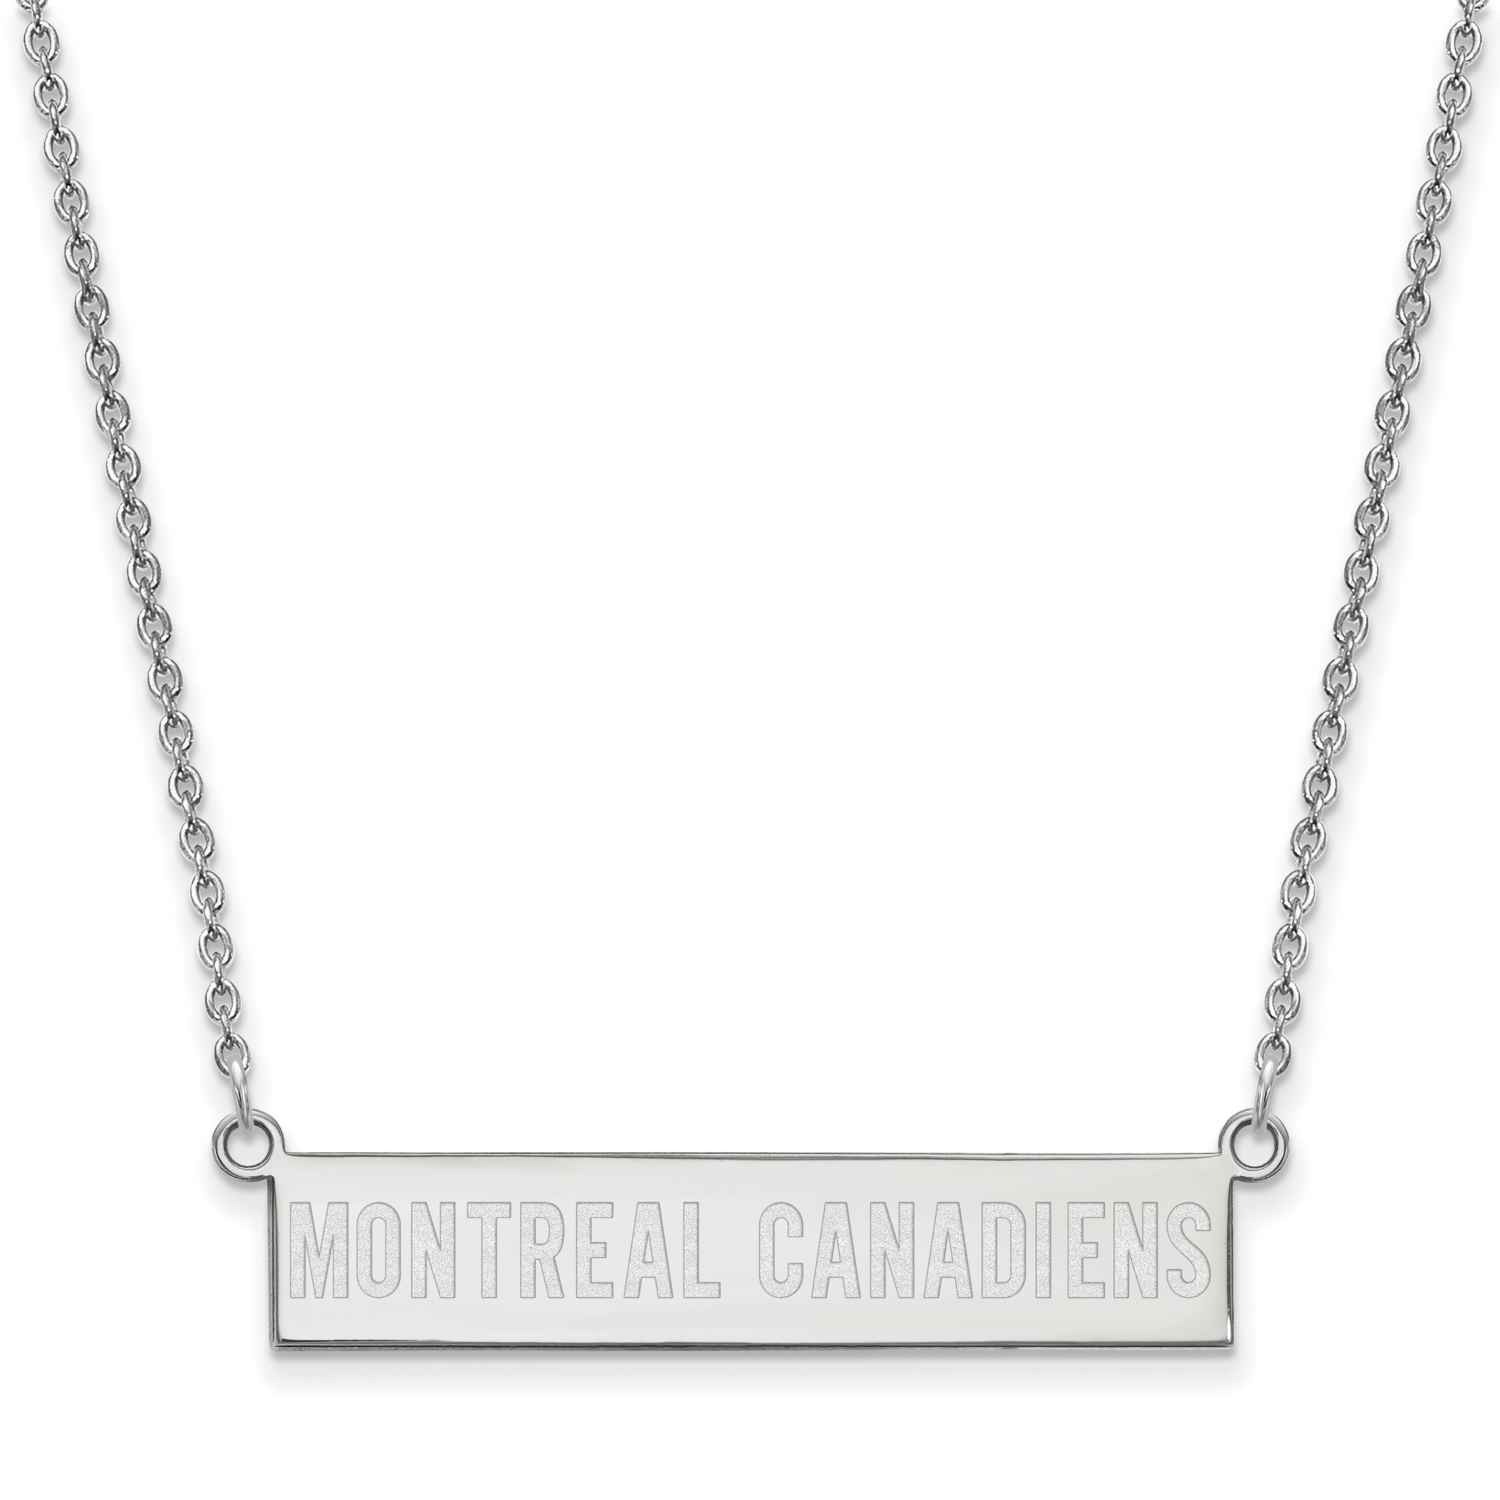 Montreal Canadiens Small Bar Necklace Sterling Silver Rhodium-plated SS023CAN-18